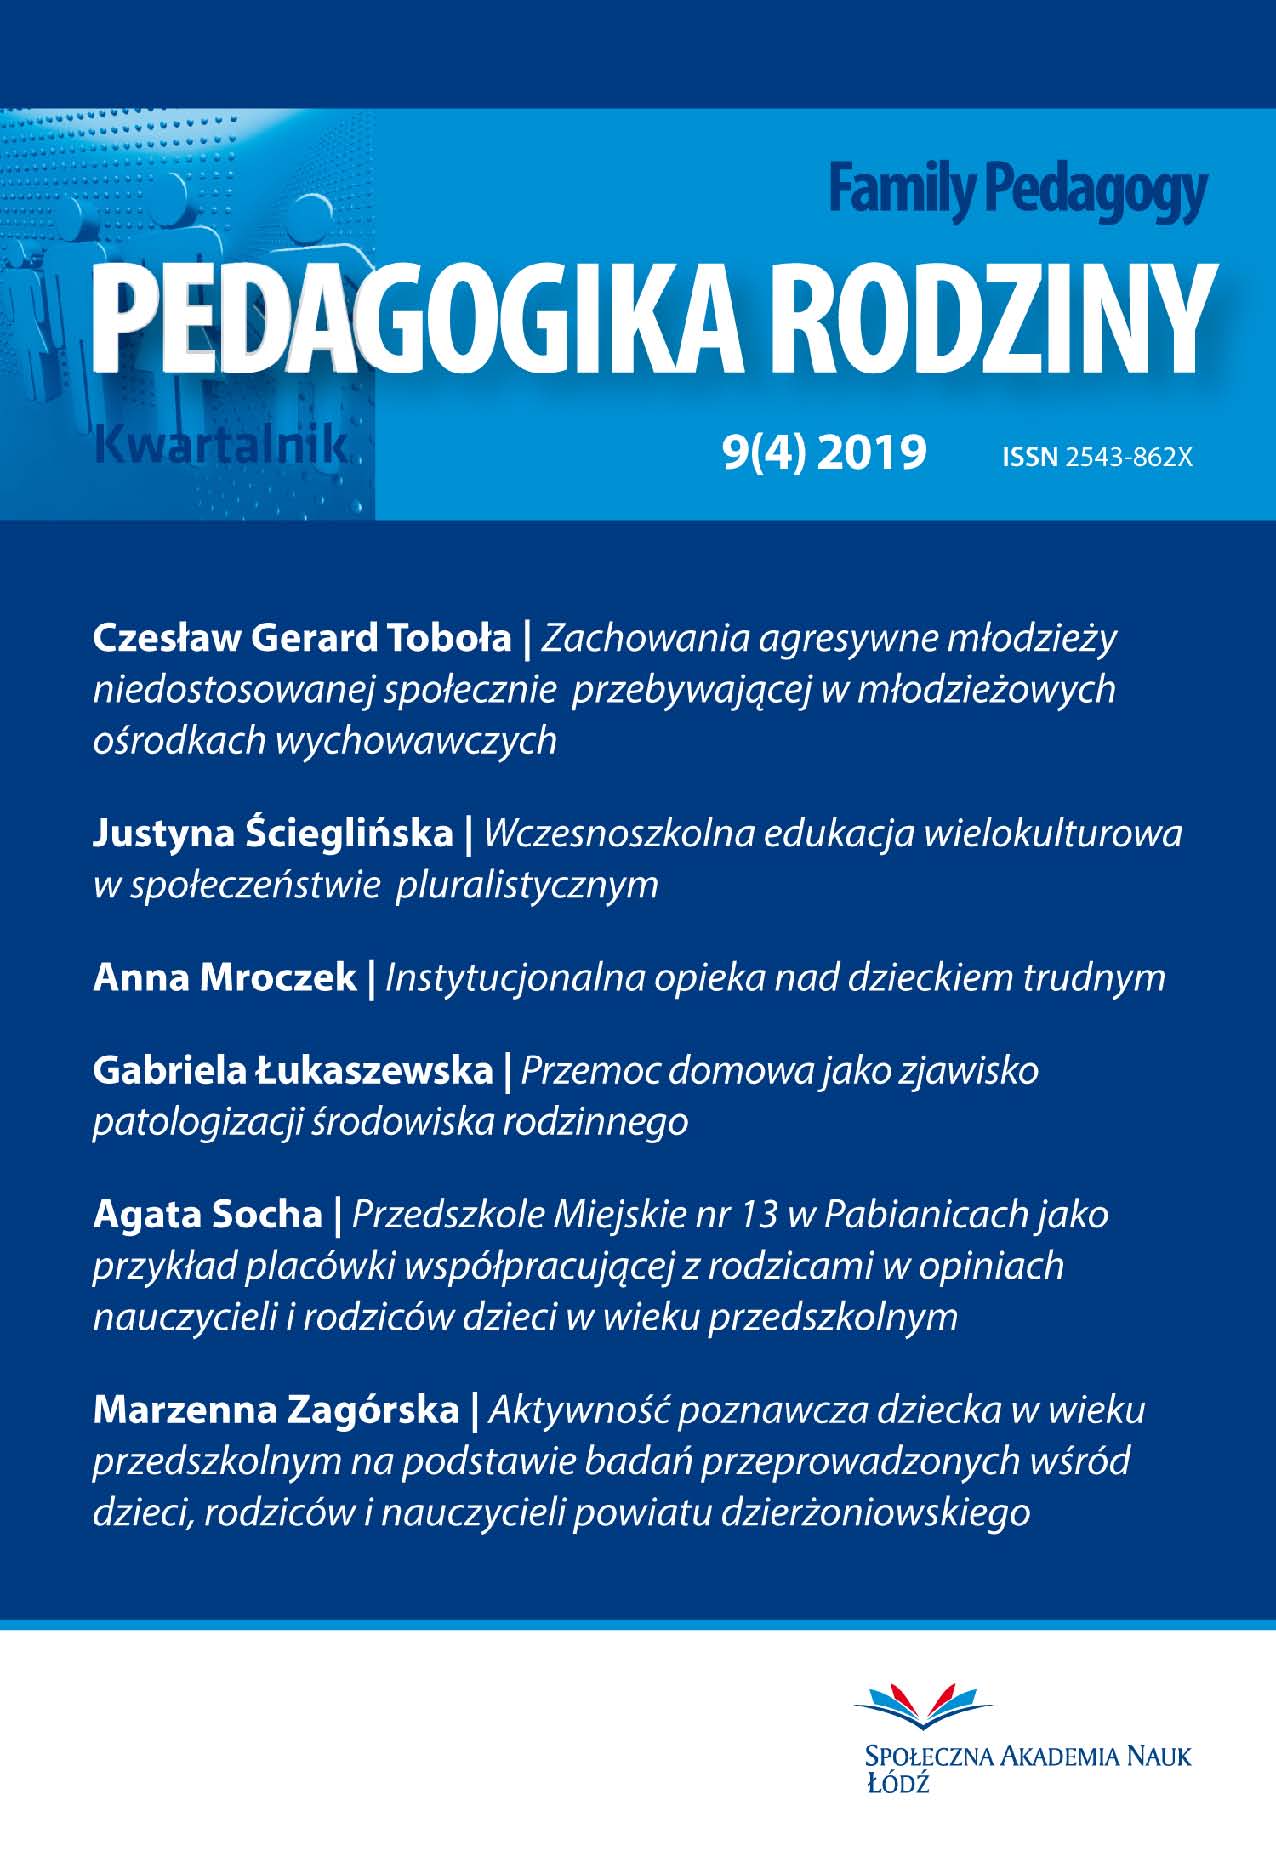 The Role of the Kindergarten in the Development of Social Competences of Pre-school Children Based on the Opinions of Teachers and Parents of Children from Kindergartens Located in the City of Bełchatów Cover Image